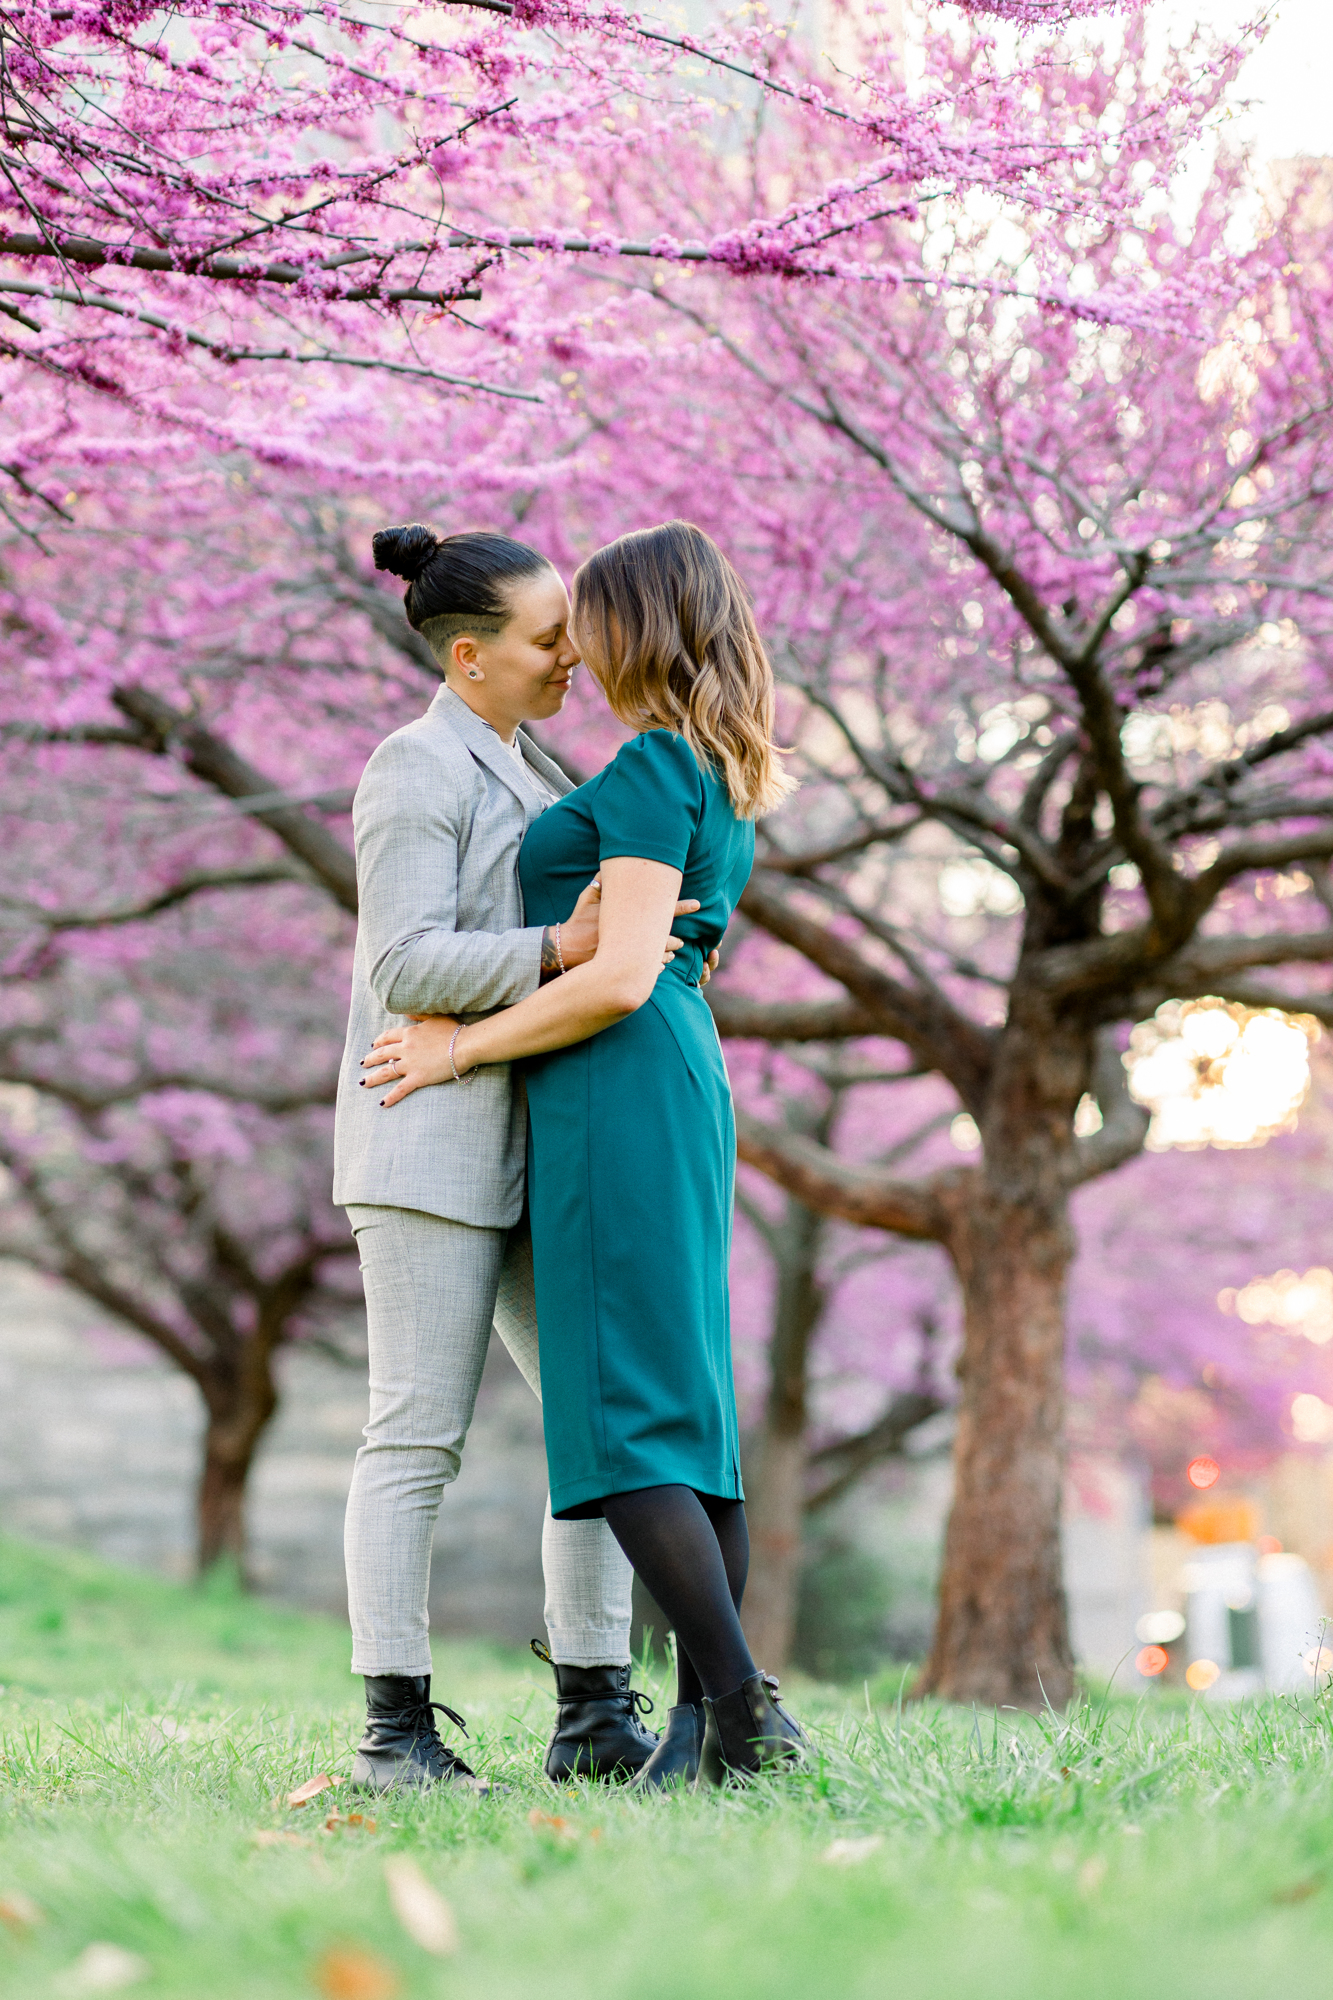 Romantic New York Engagement Photography with Spring Blossoms